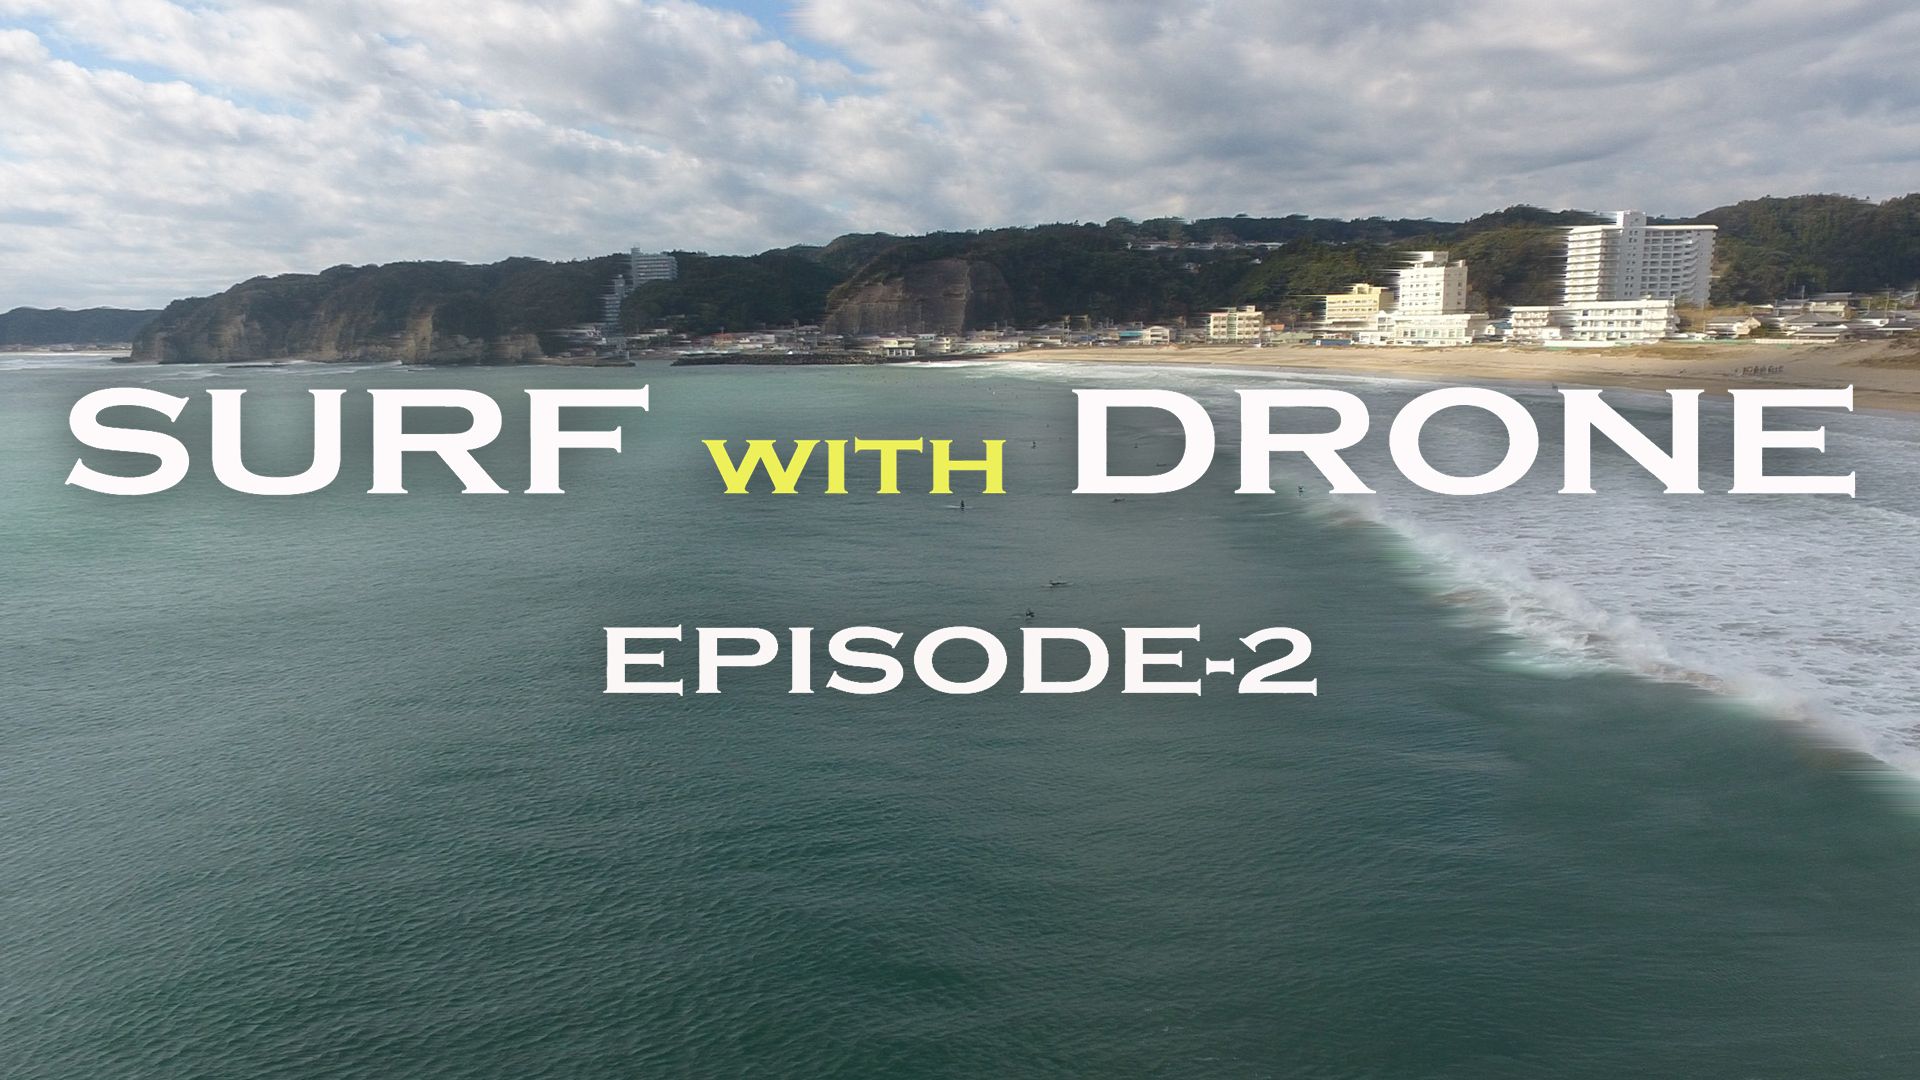 SURF WITH DRONE EPISODE-2